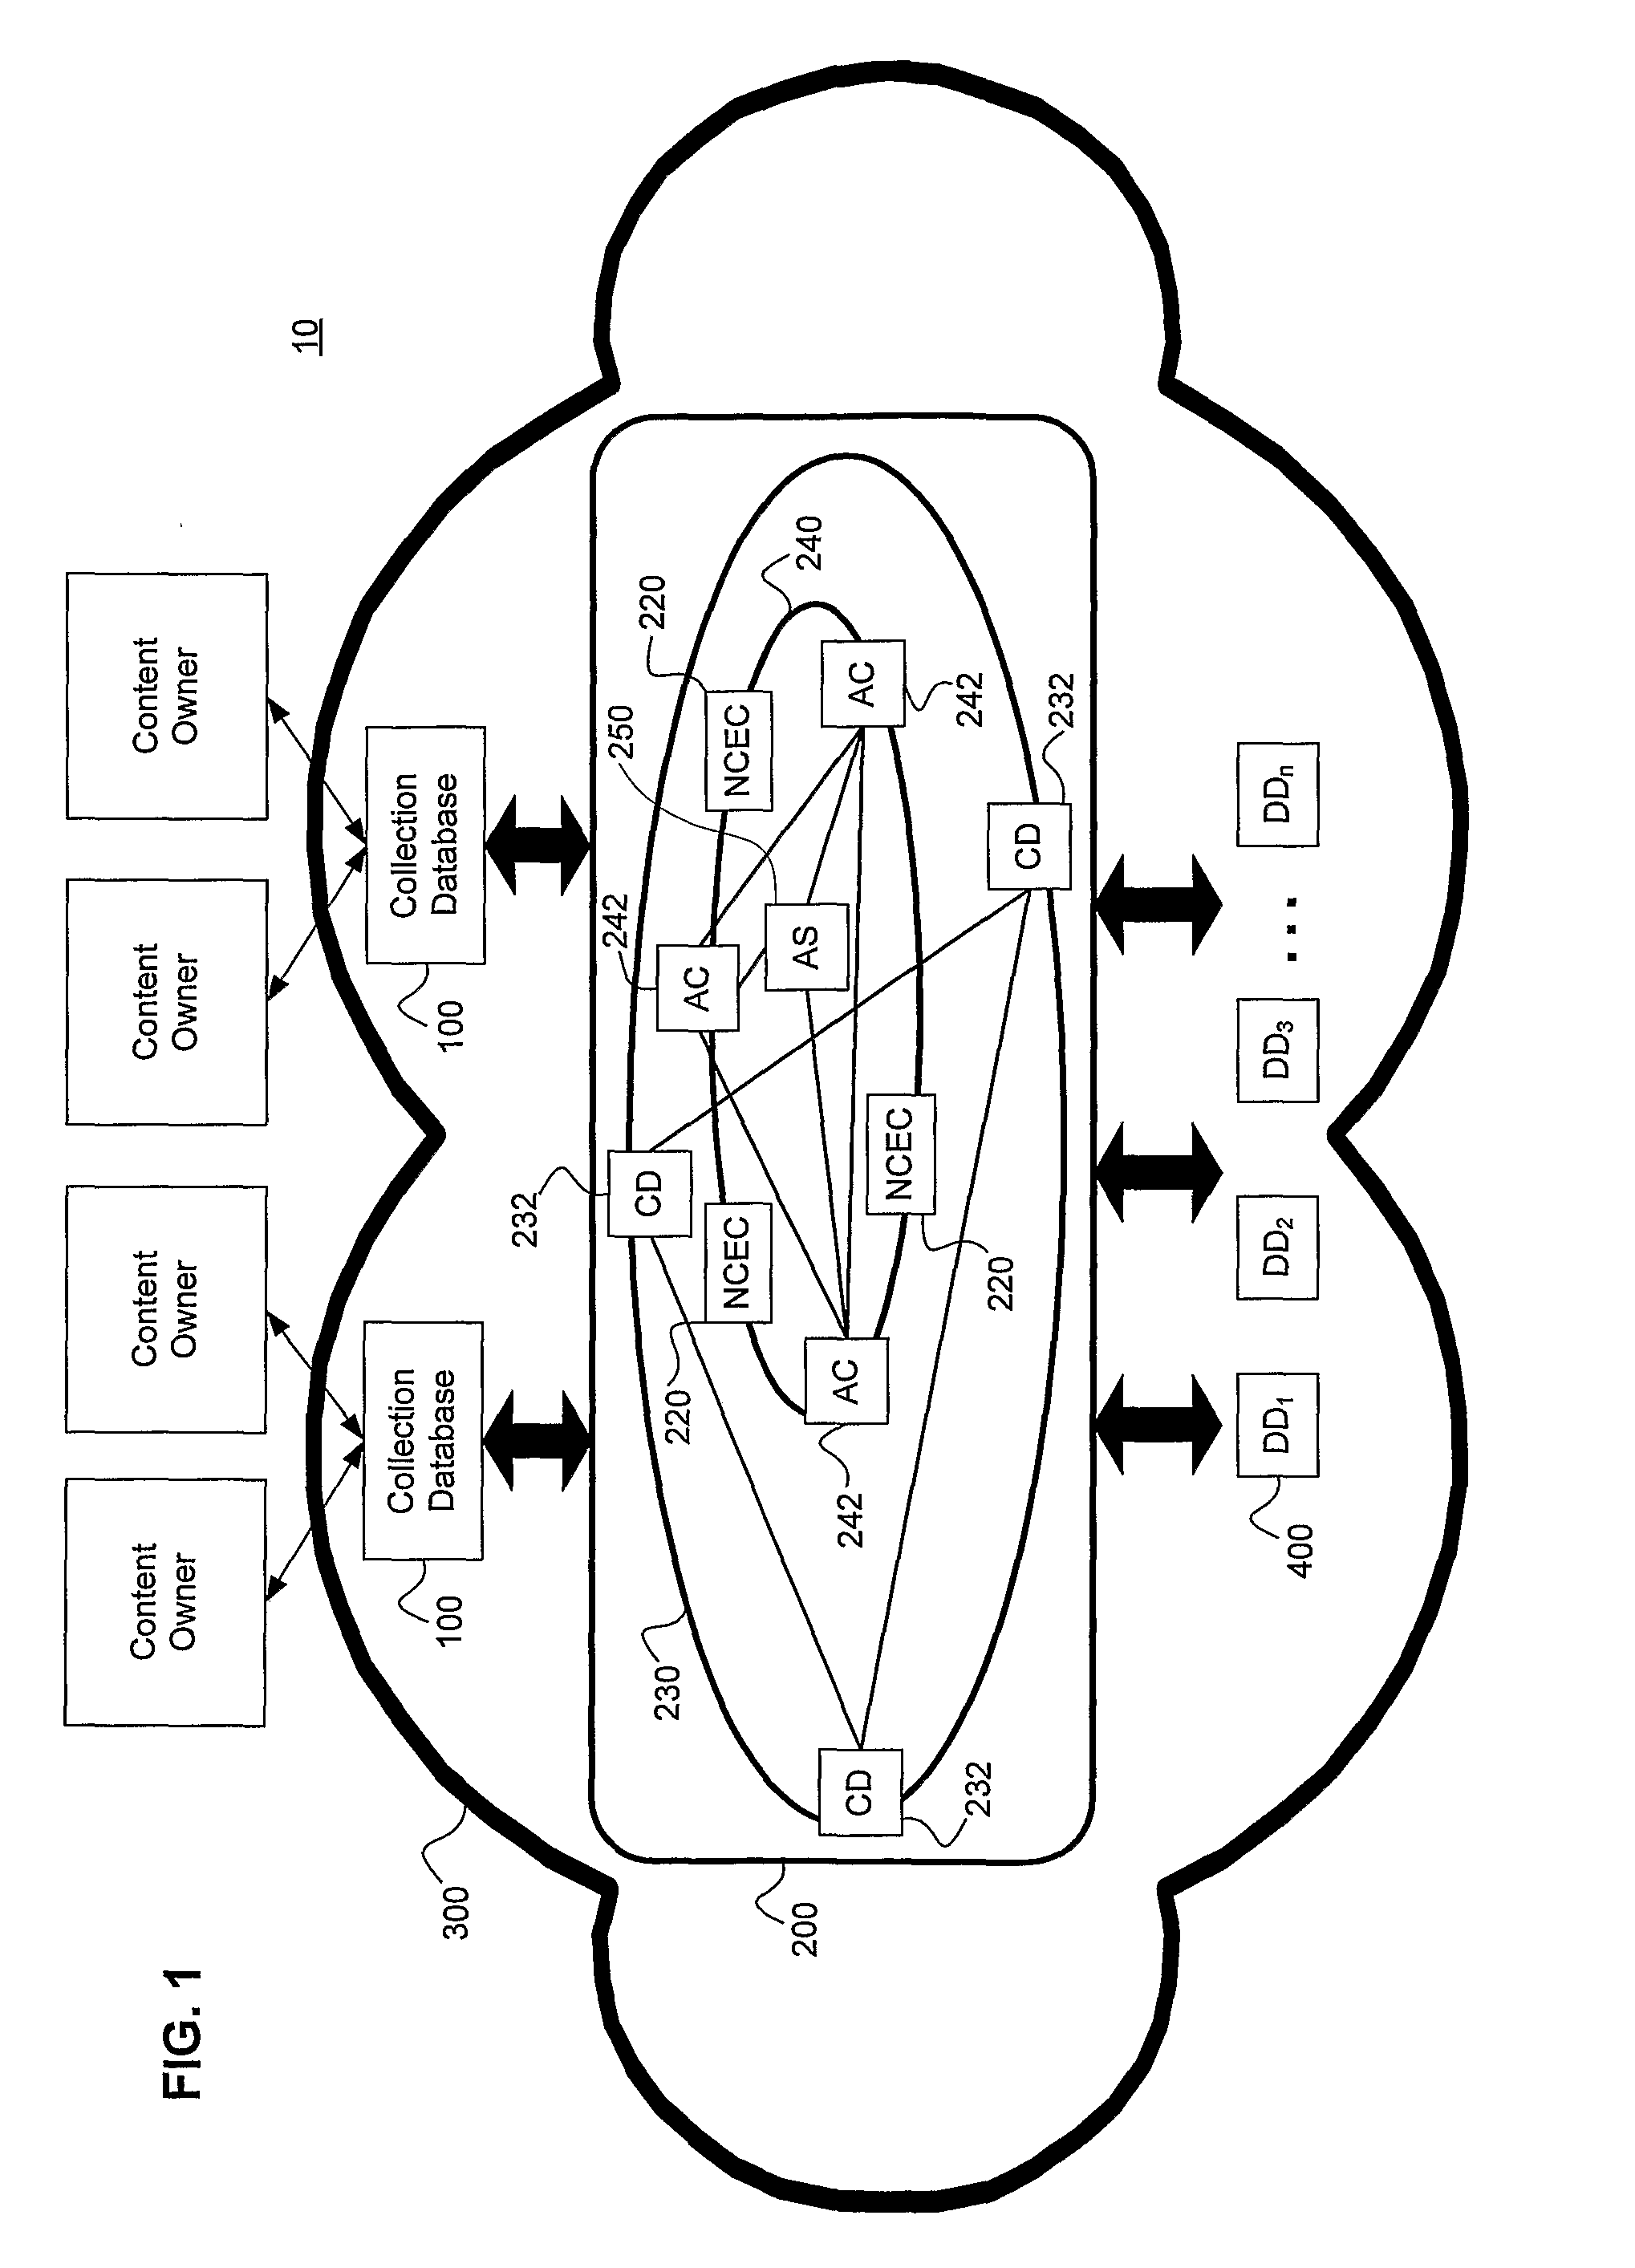 System and Method For Securely Communicating On-Demand Content From Closed Network to Dedicated Devices, and For Compiling Content Usage Data in Closed Network Securely Communicating Content to Dedicated Devices